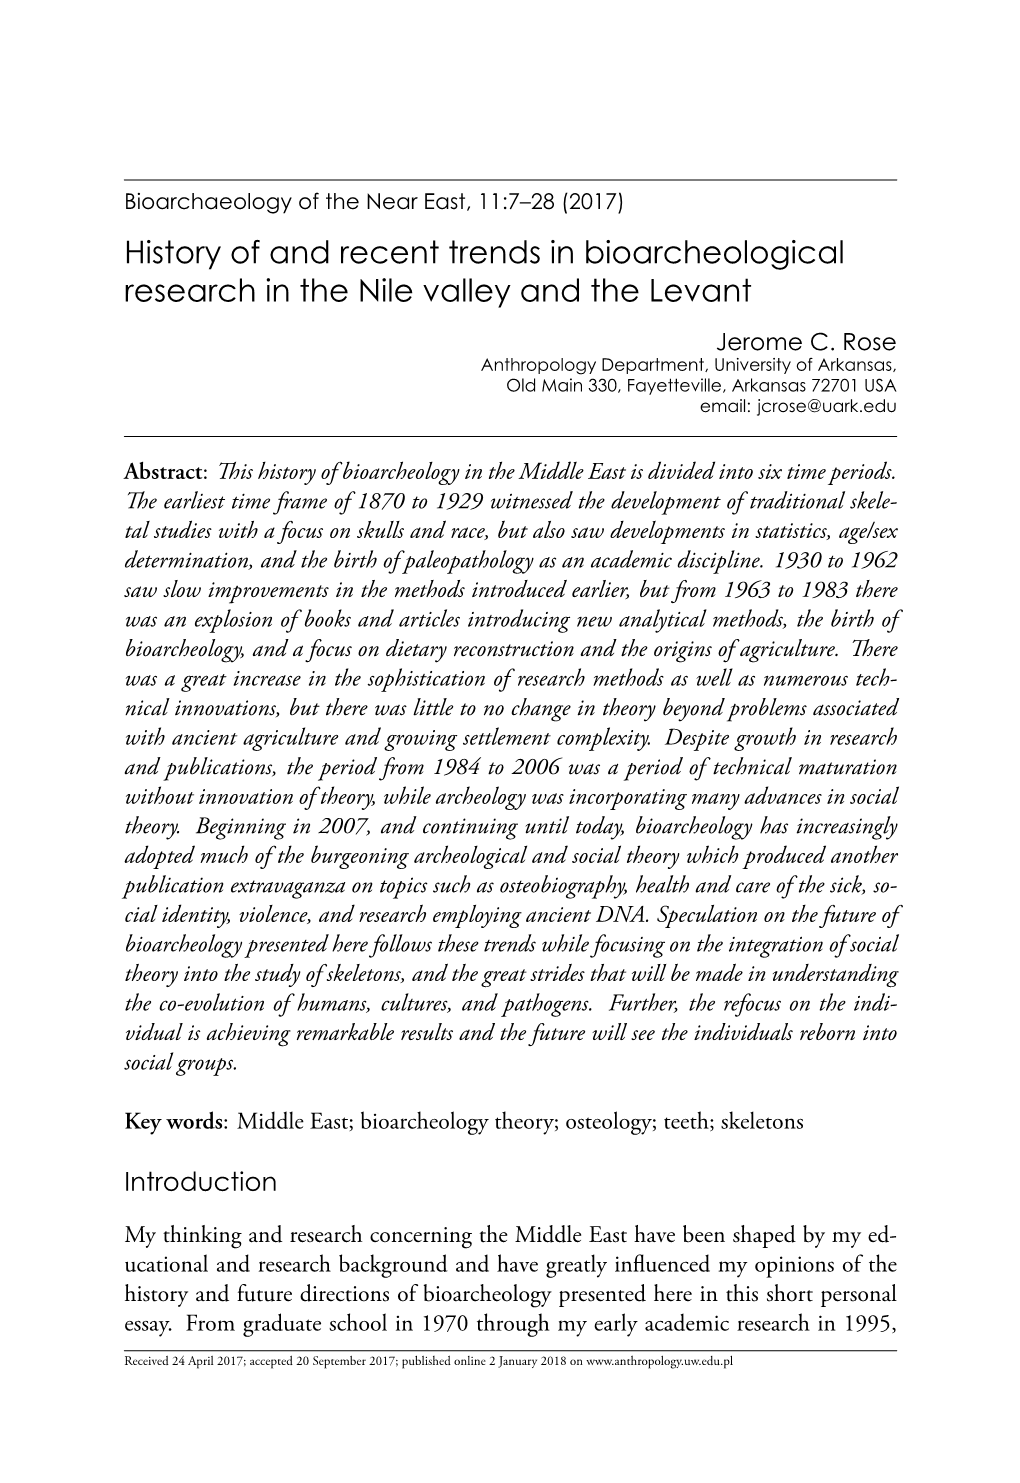 History of and Recent Trends in Bioarcheological Research in the Nile Valley and the Levant Jerome C